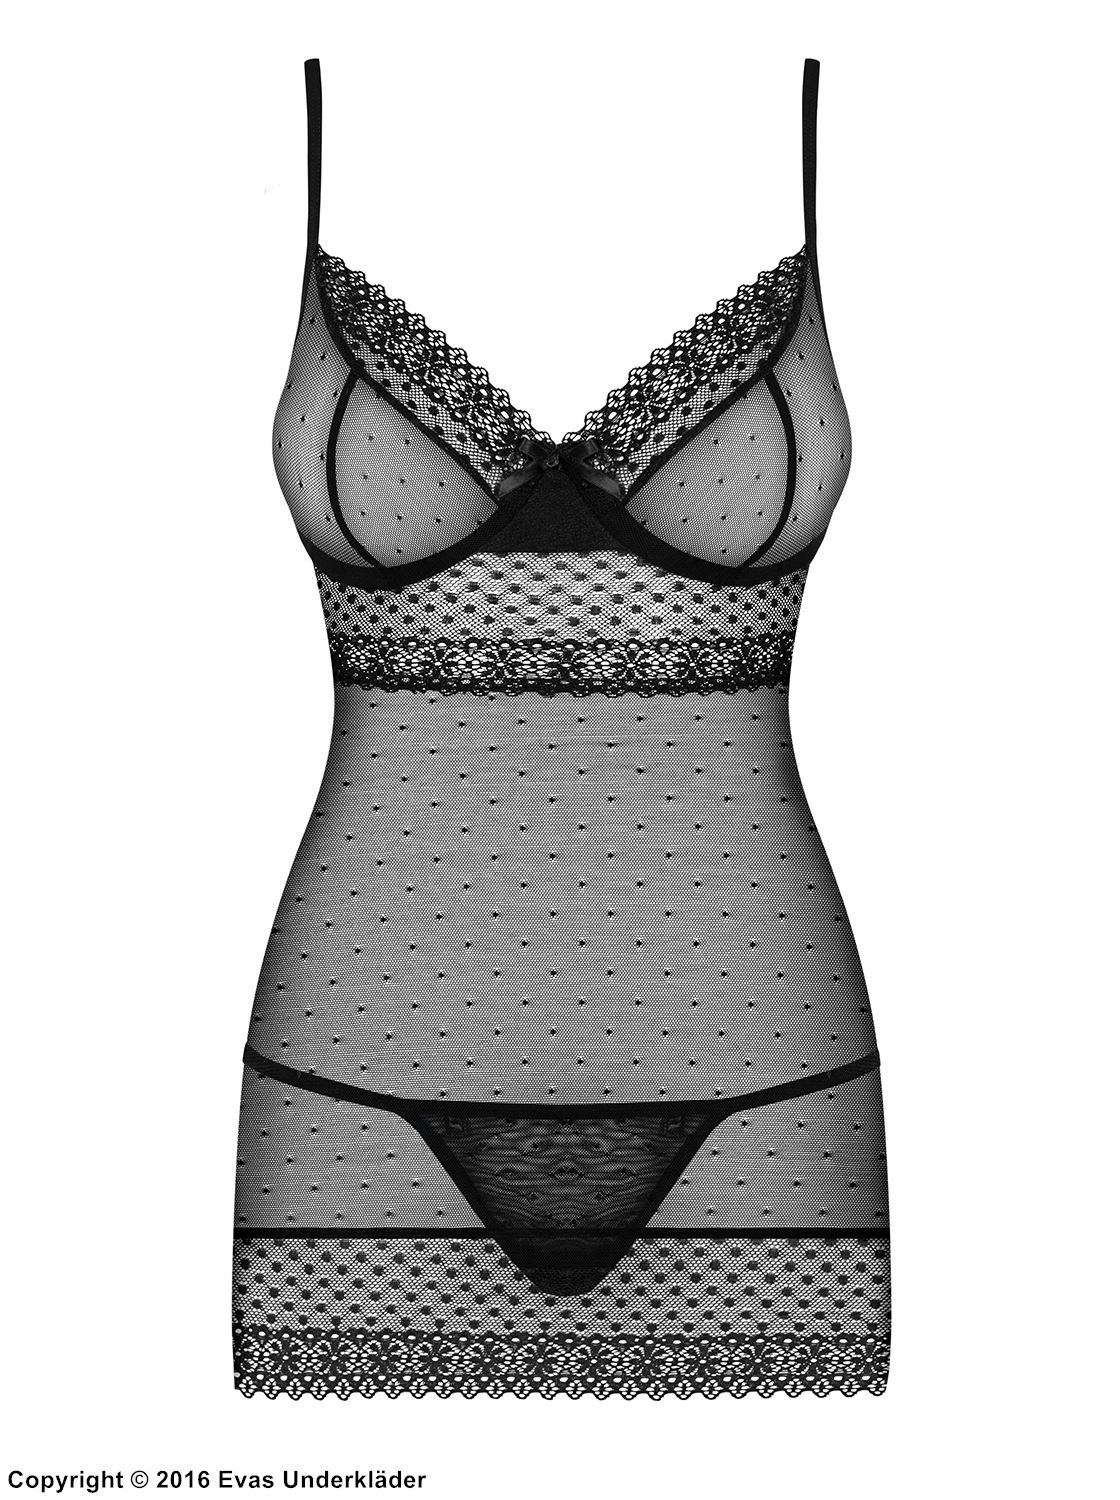 Skin-tight chemise, see-through mesh, lace edge, small dots